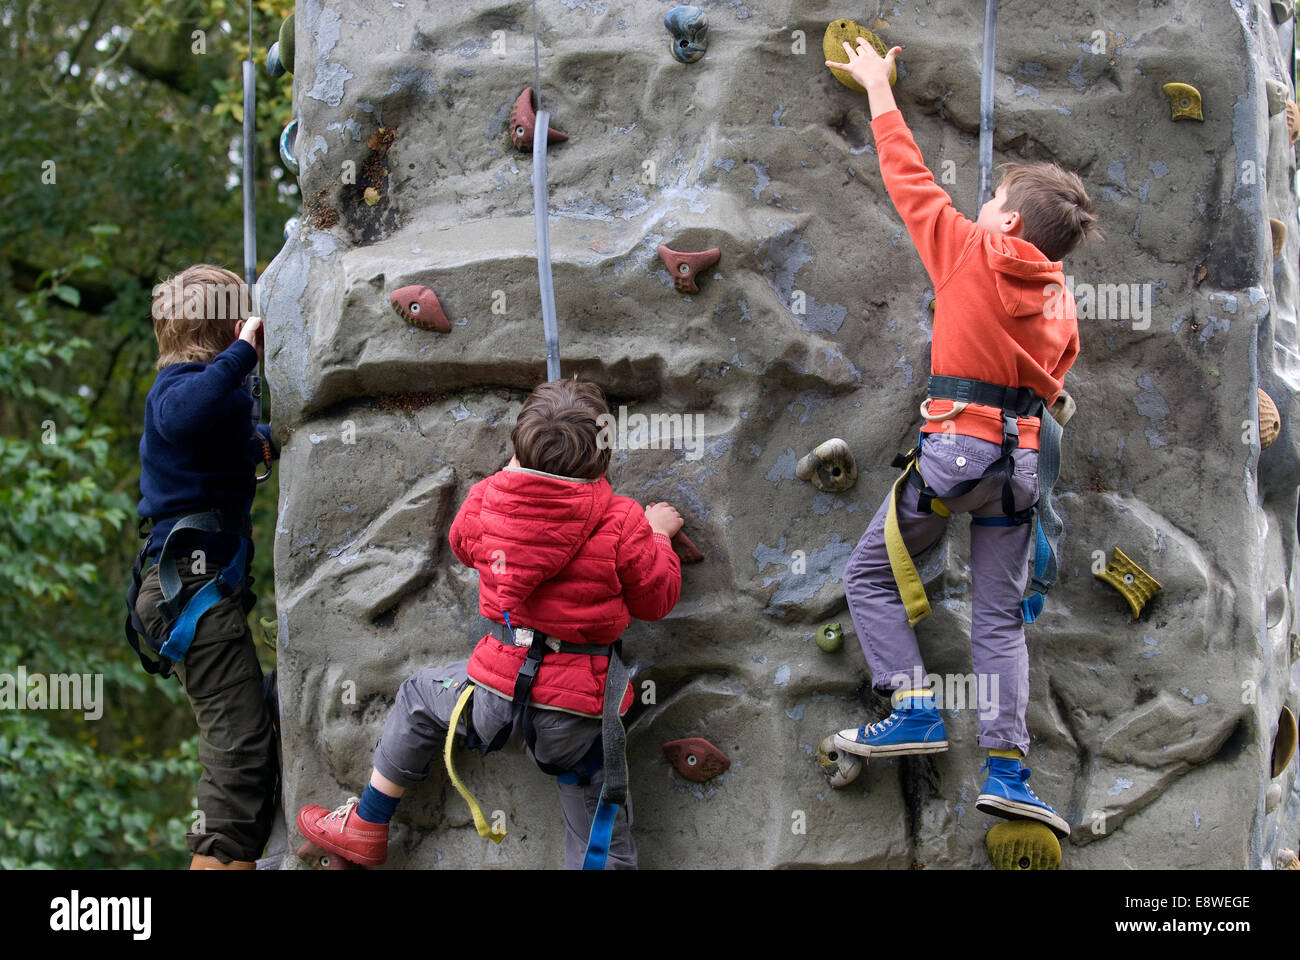 Three kids attempting the climbing wall at a farm open day, Blackmoor, Hampshire, UK. Stock Photo